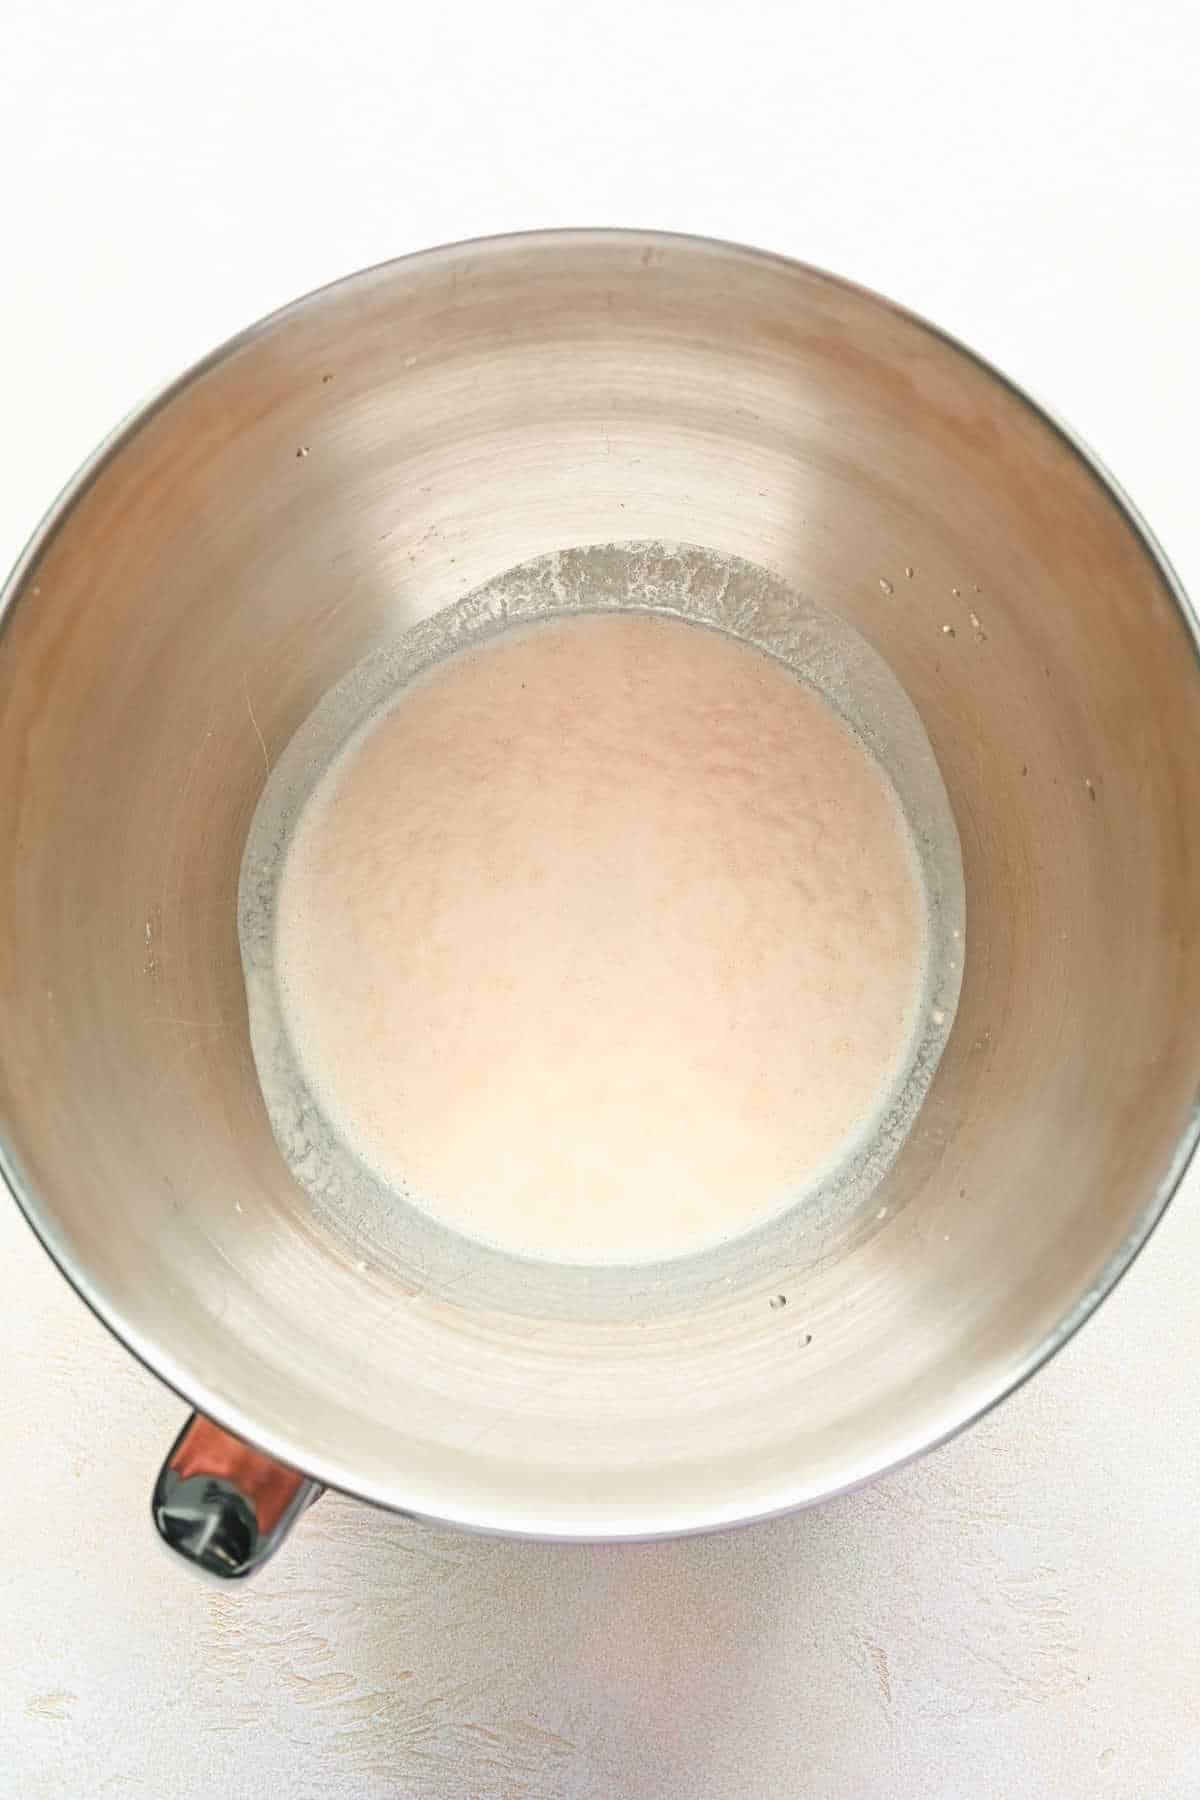 Yeast proofing in warm water in a silver mixing bowl.